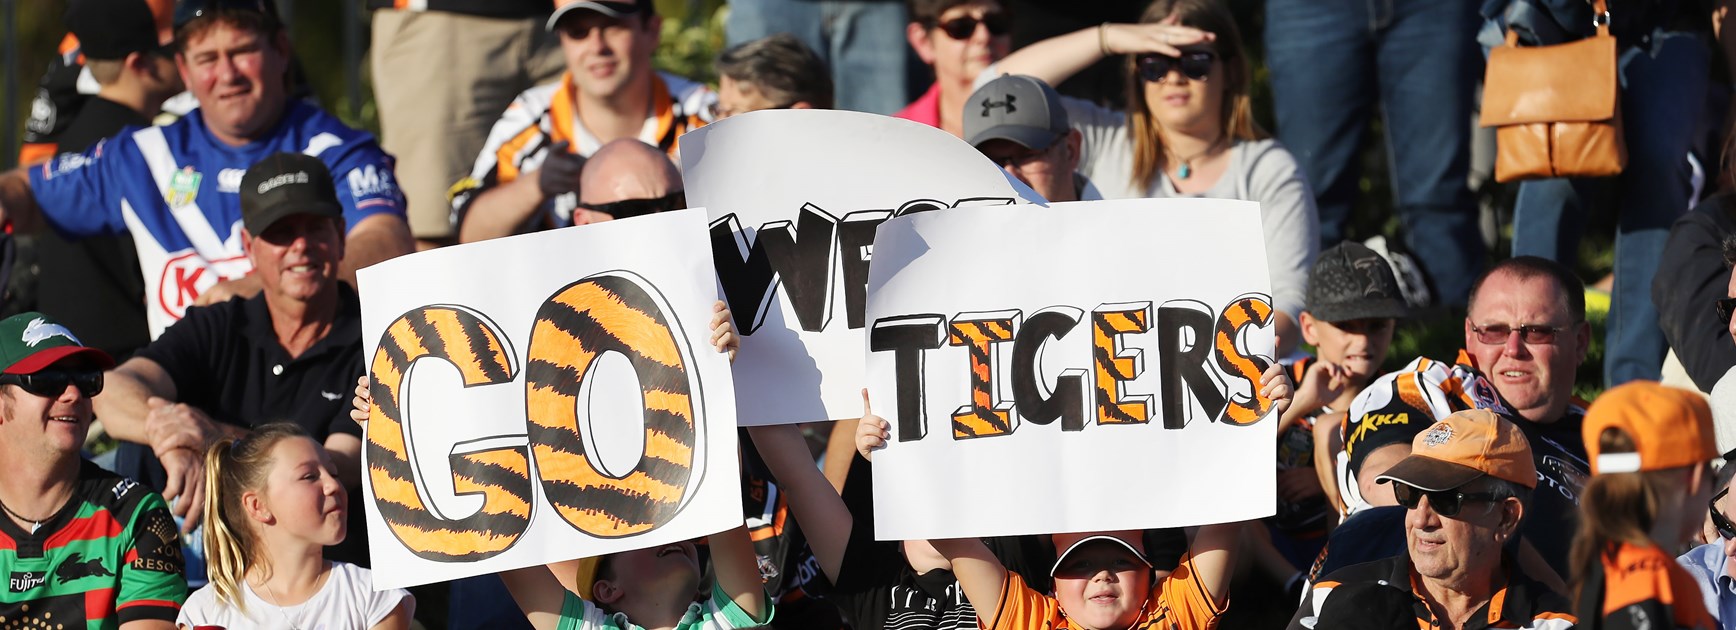 Wests Tigers in Tamworth